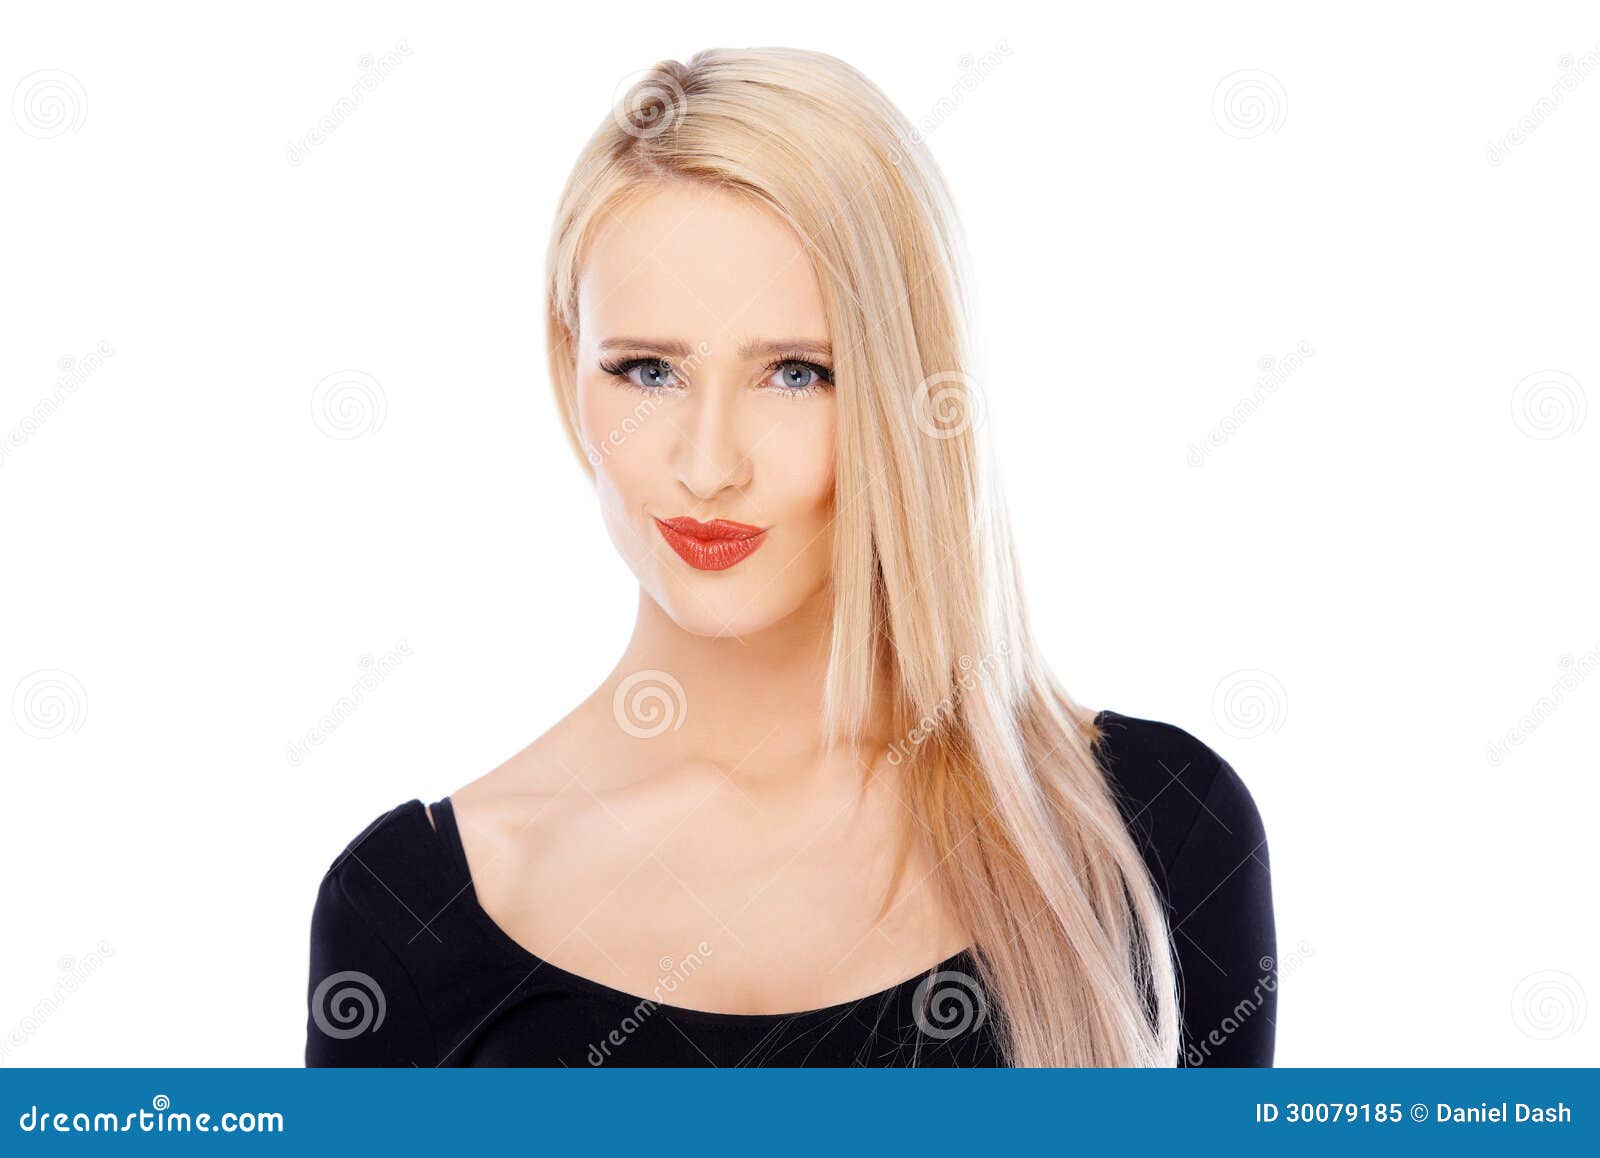 Long Haired Blond Woman Posing on White Stock Image - Image of young ...